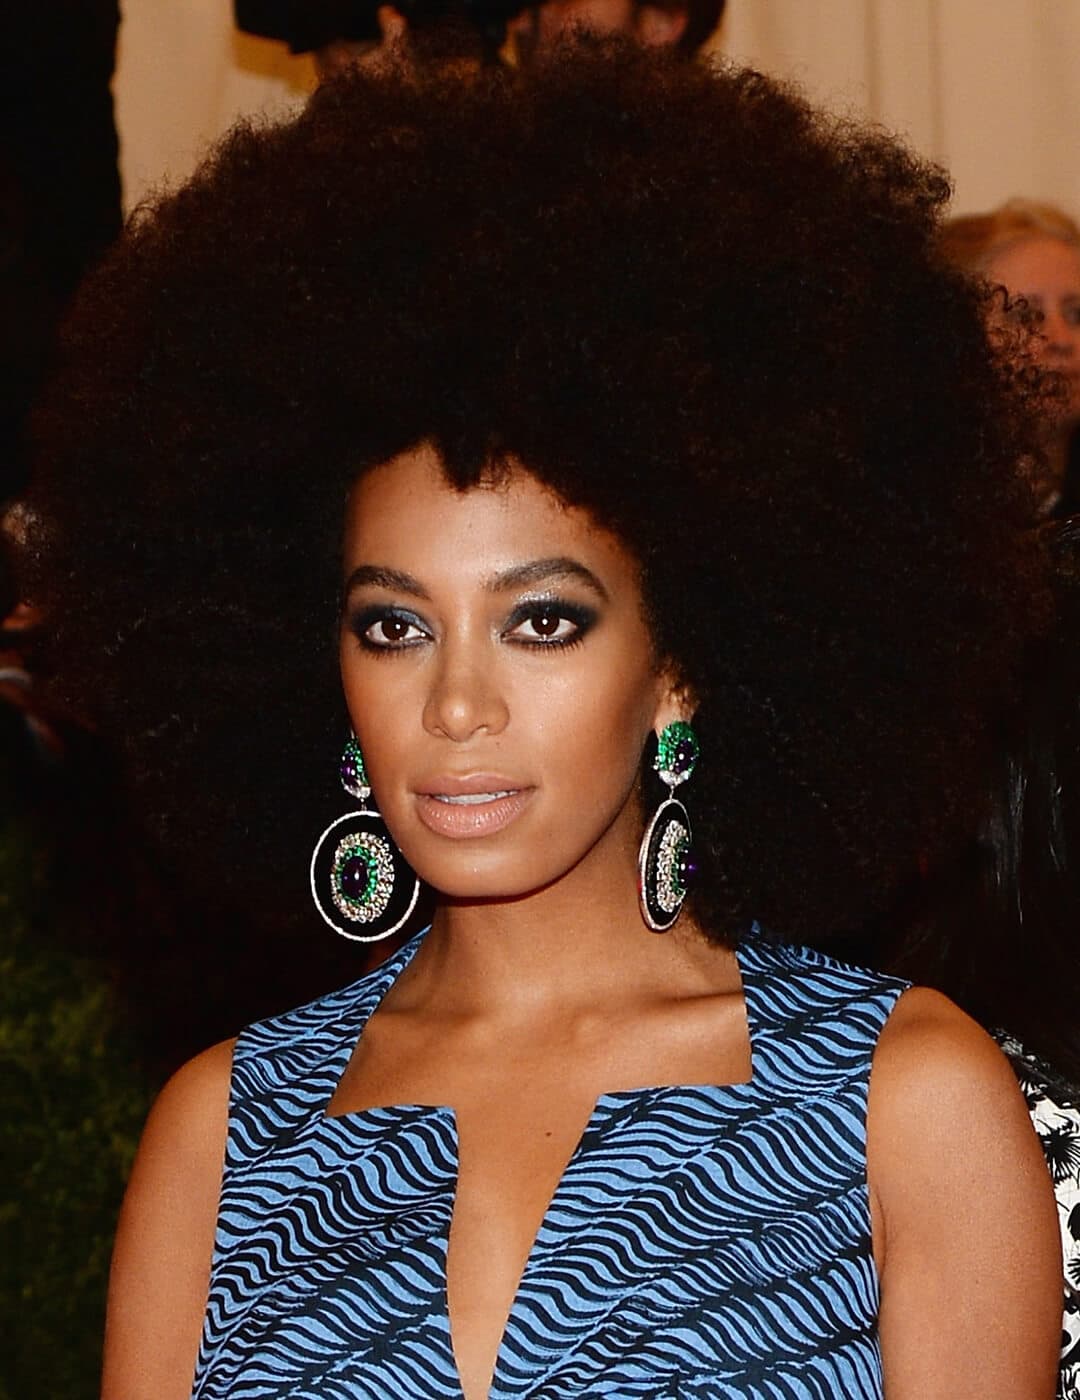 Solange Knowles rocking an afro hairstyle and groovy blue outfit